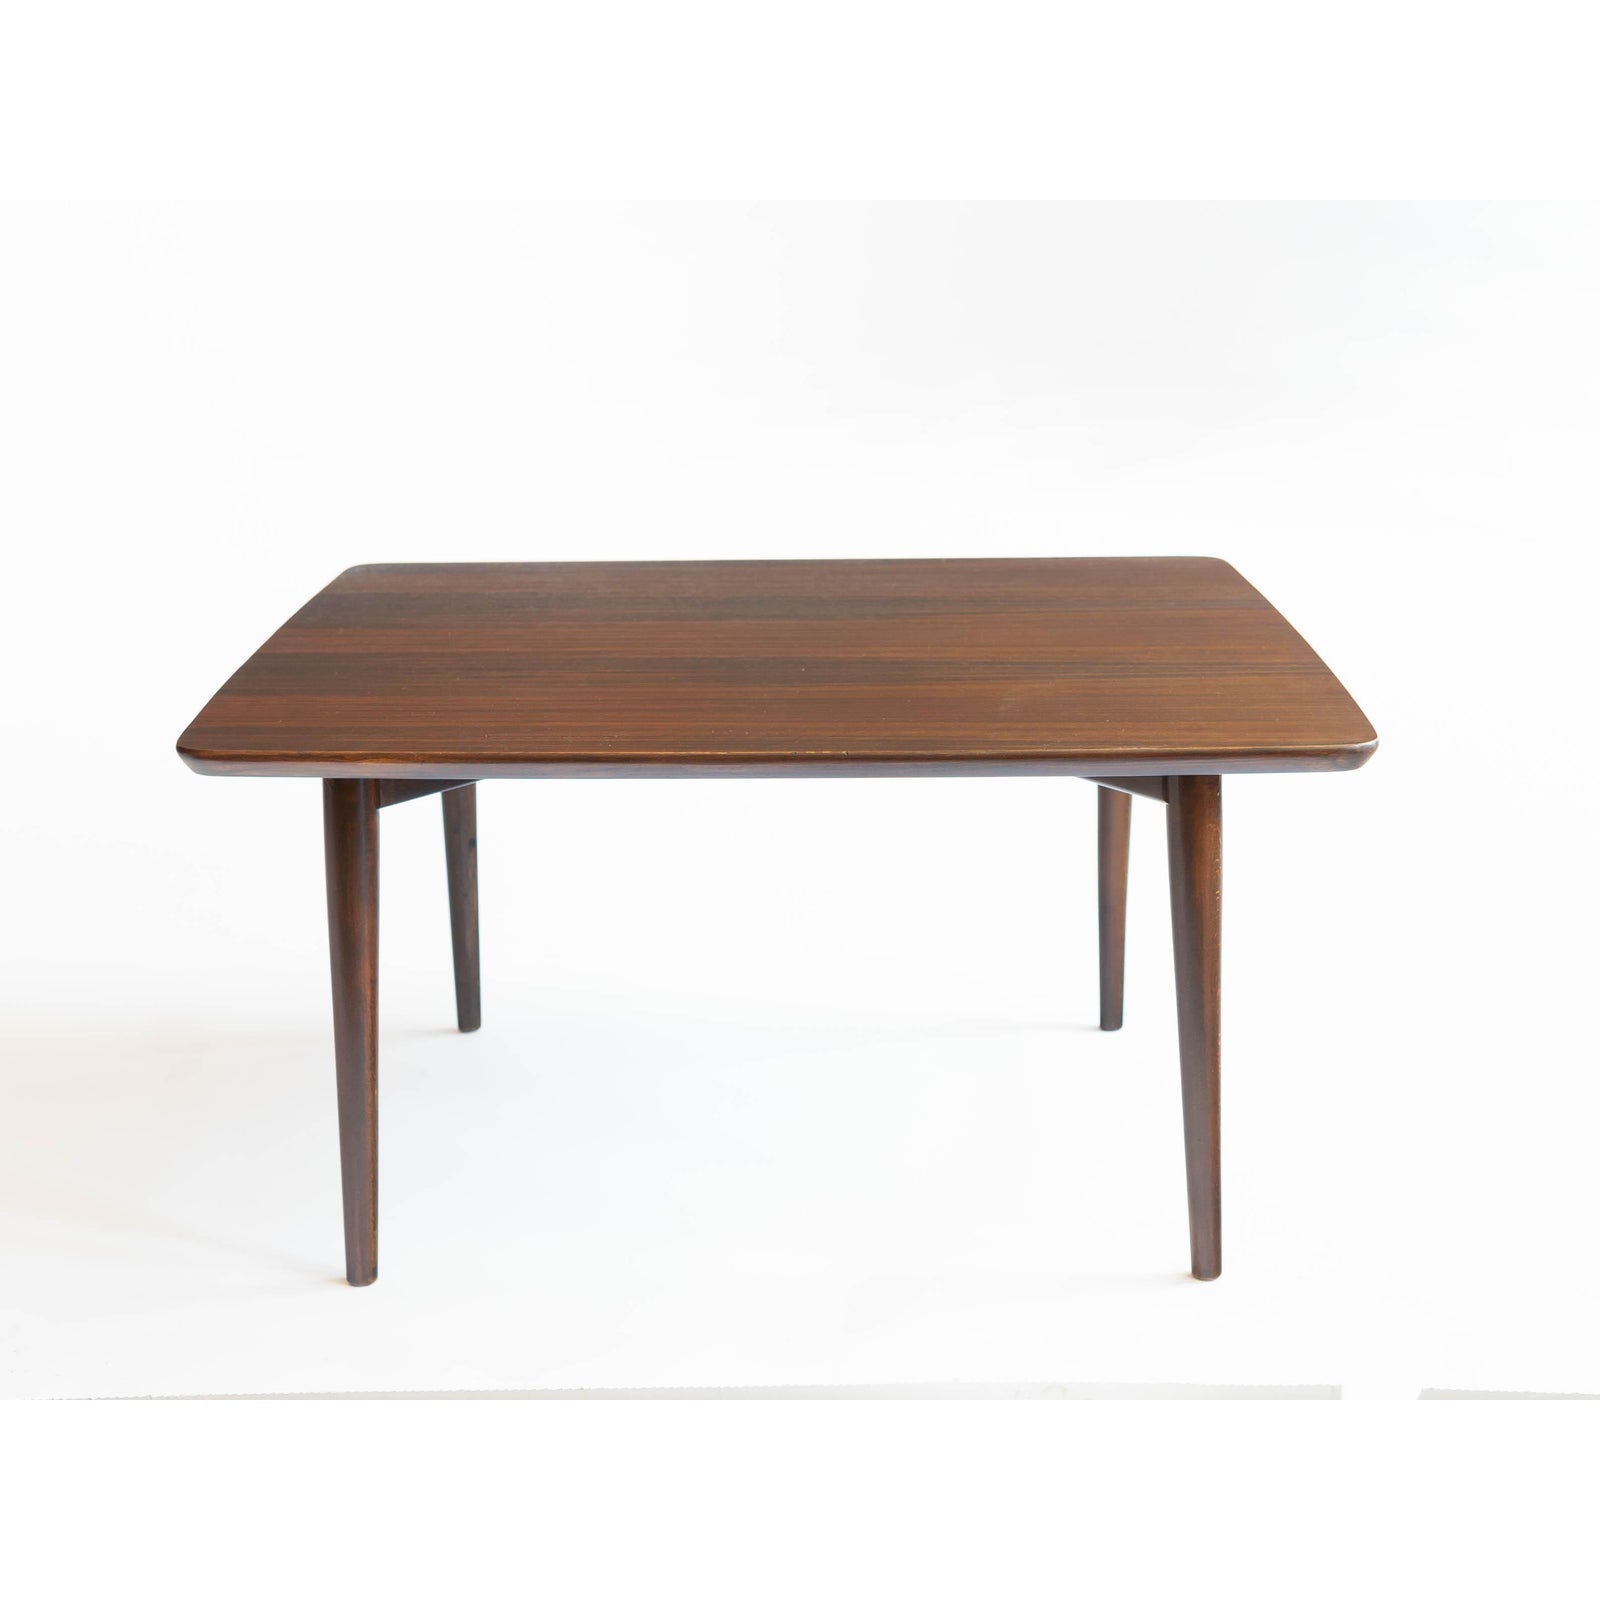 Swedish Modern Teak Coffee Table Attributed to Folke Ohlsson for Dux